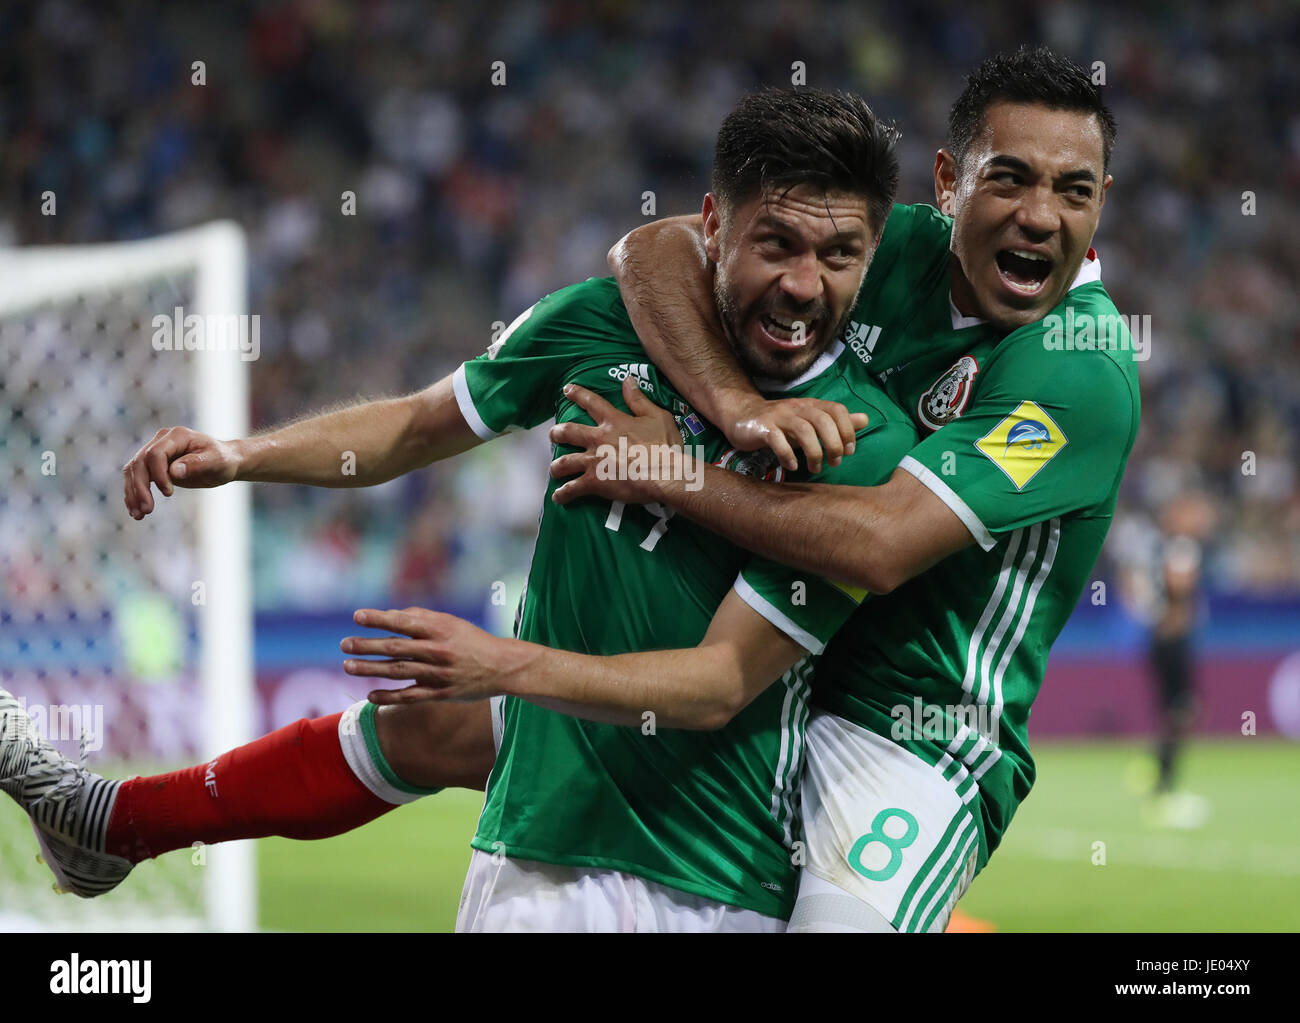 Sochi, Russia. 21st June, 2017. Oribe Peralta (L) of Mexico celebrates scoring with his teammate Marco Fabian during the group A match between Mexico and New Zealand of the 2017 FIFA Confederations Cup in Sochi, Russia, on June 21, 2017. Mexico won 2-1. Credit: Xu Zijian/Xinhua/Alamy Live News Stock Photo